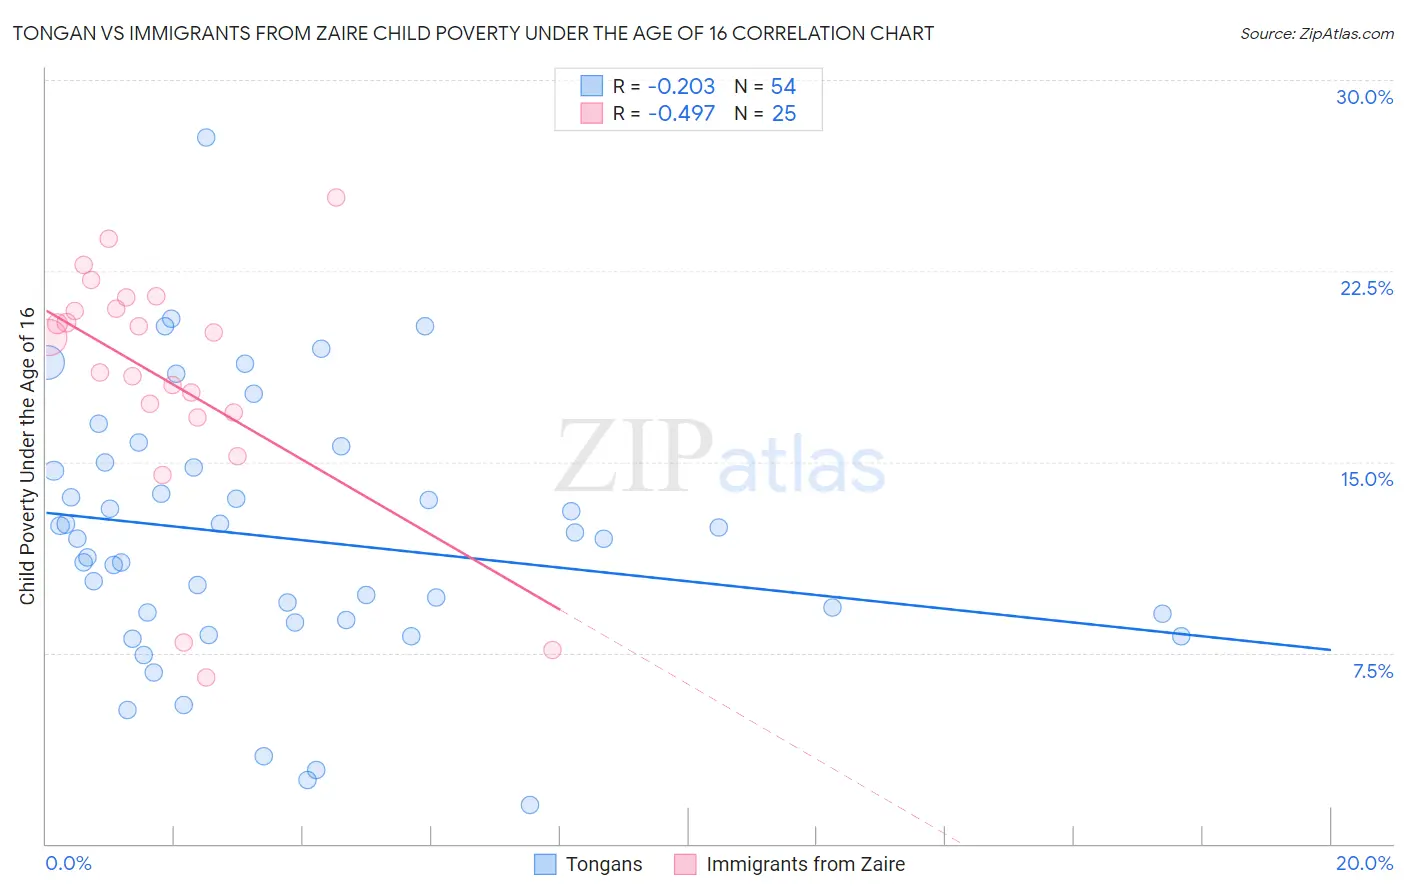 Tongan vs Immigrants from Zaire Child Poverty Under the Age of 16